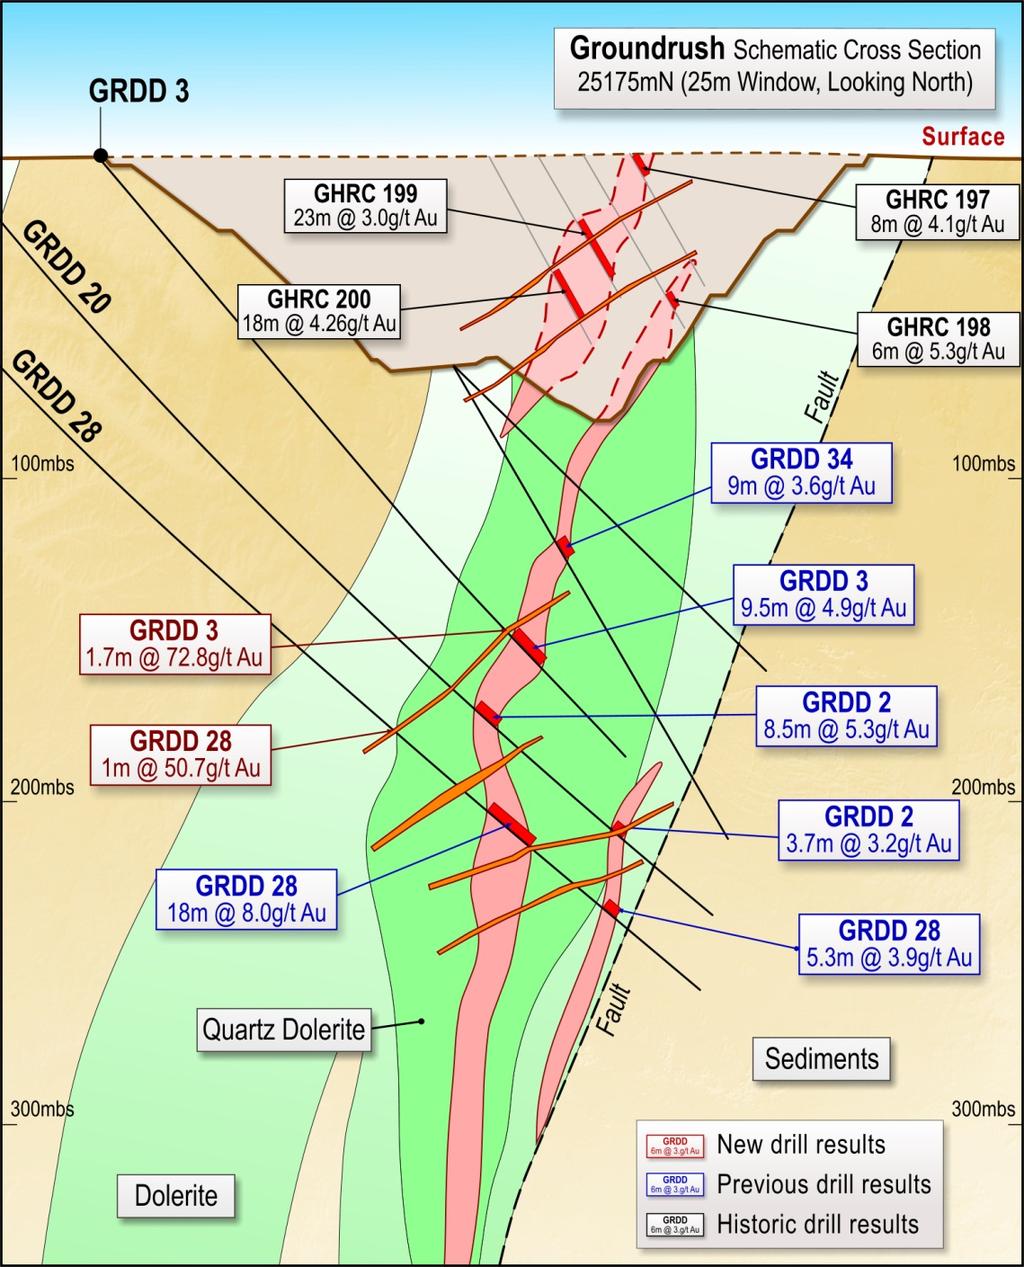 Groundrush Geology & Exploration Geology Focussed effort on developing a strong geological model and understanding Shifted to predictive exploration drilling Geological knowledge allowing appropriate